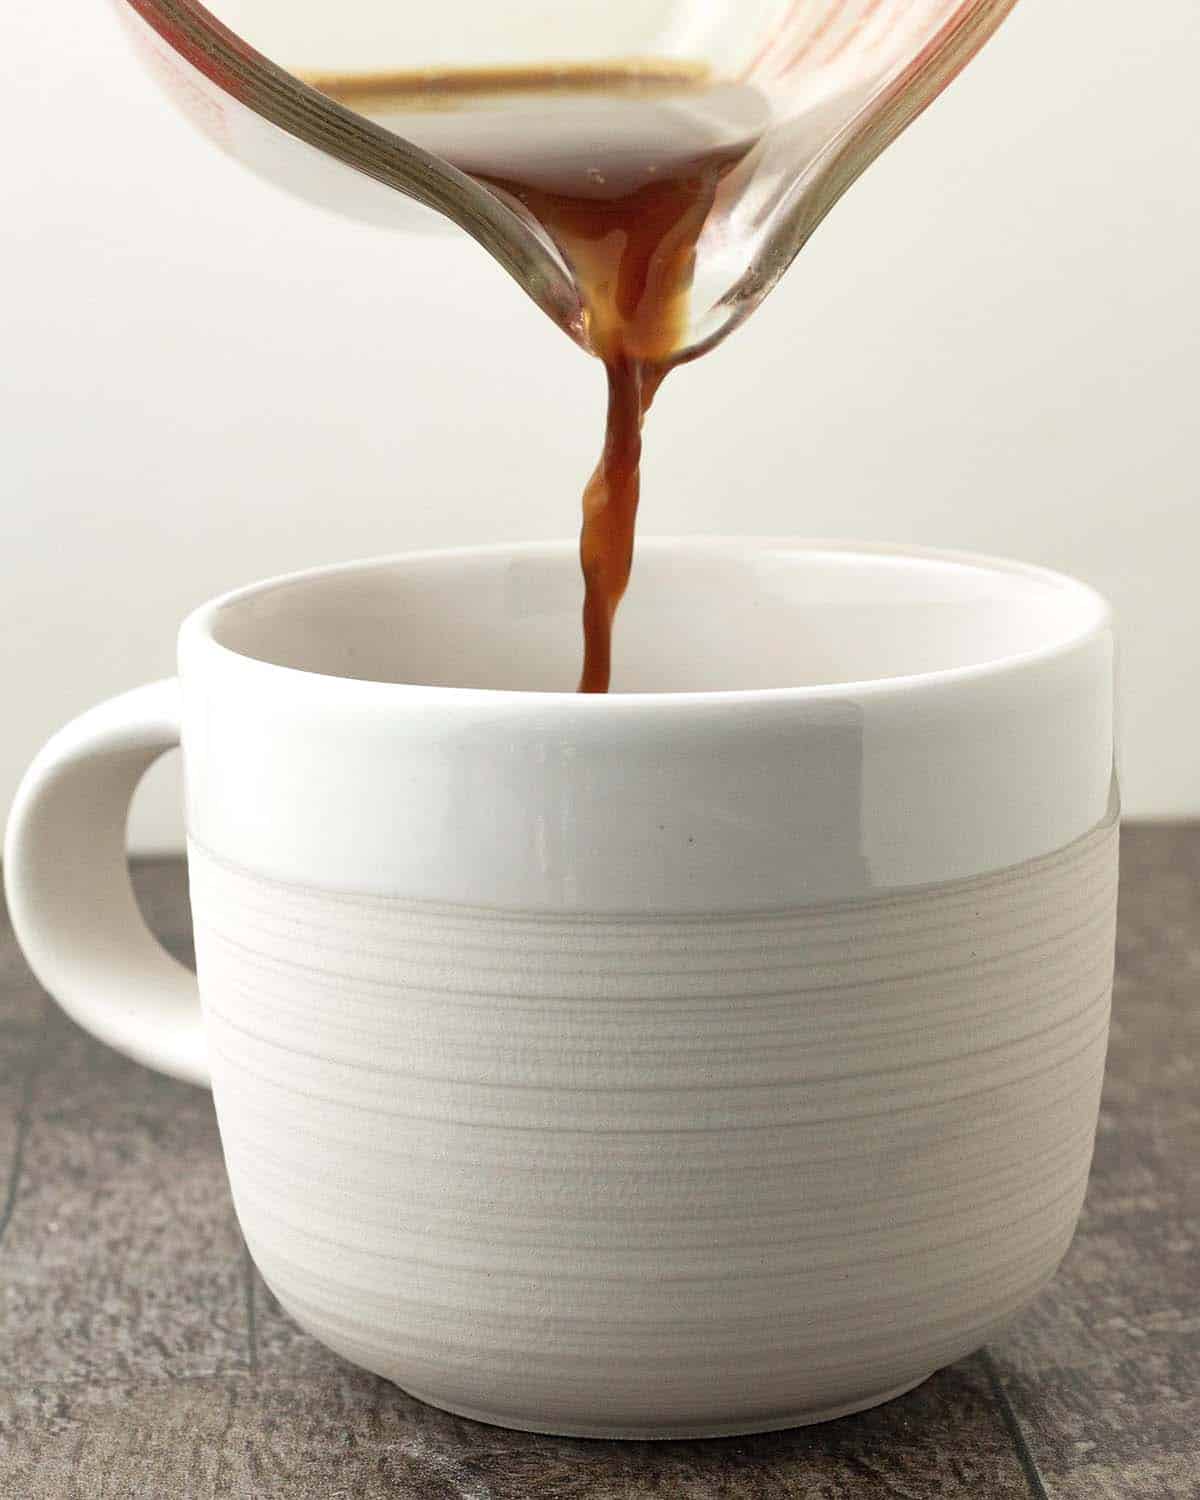 Coffee being poured from a glass container into a mug.